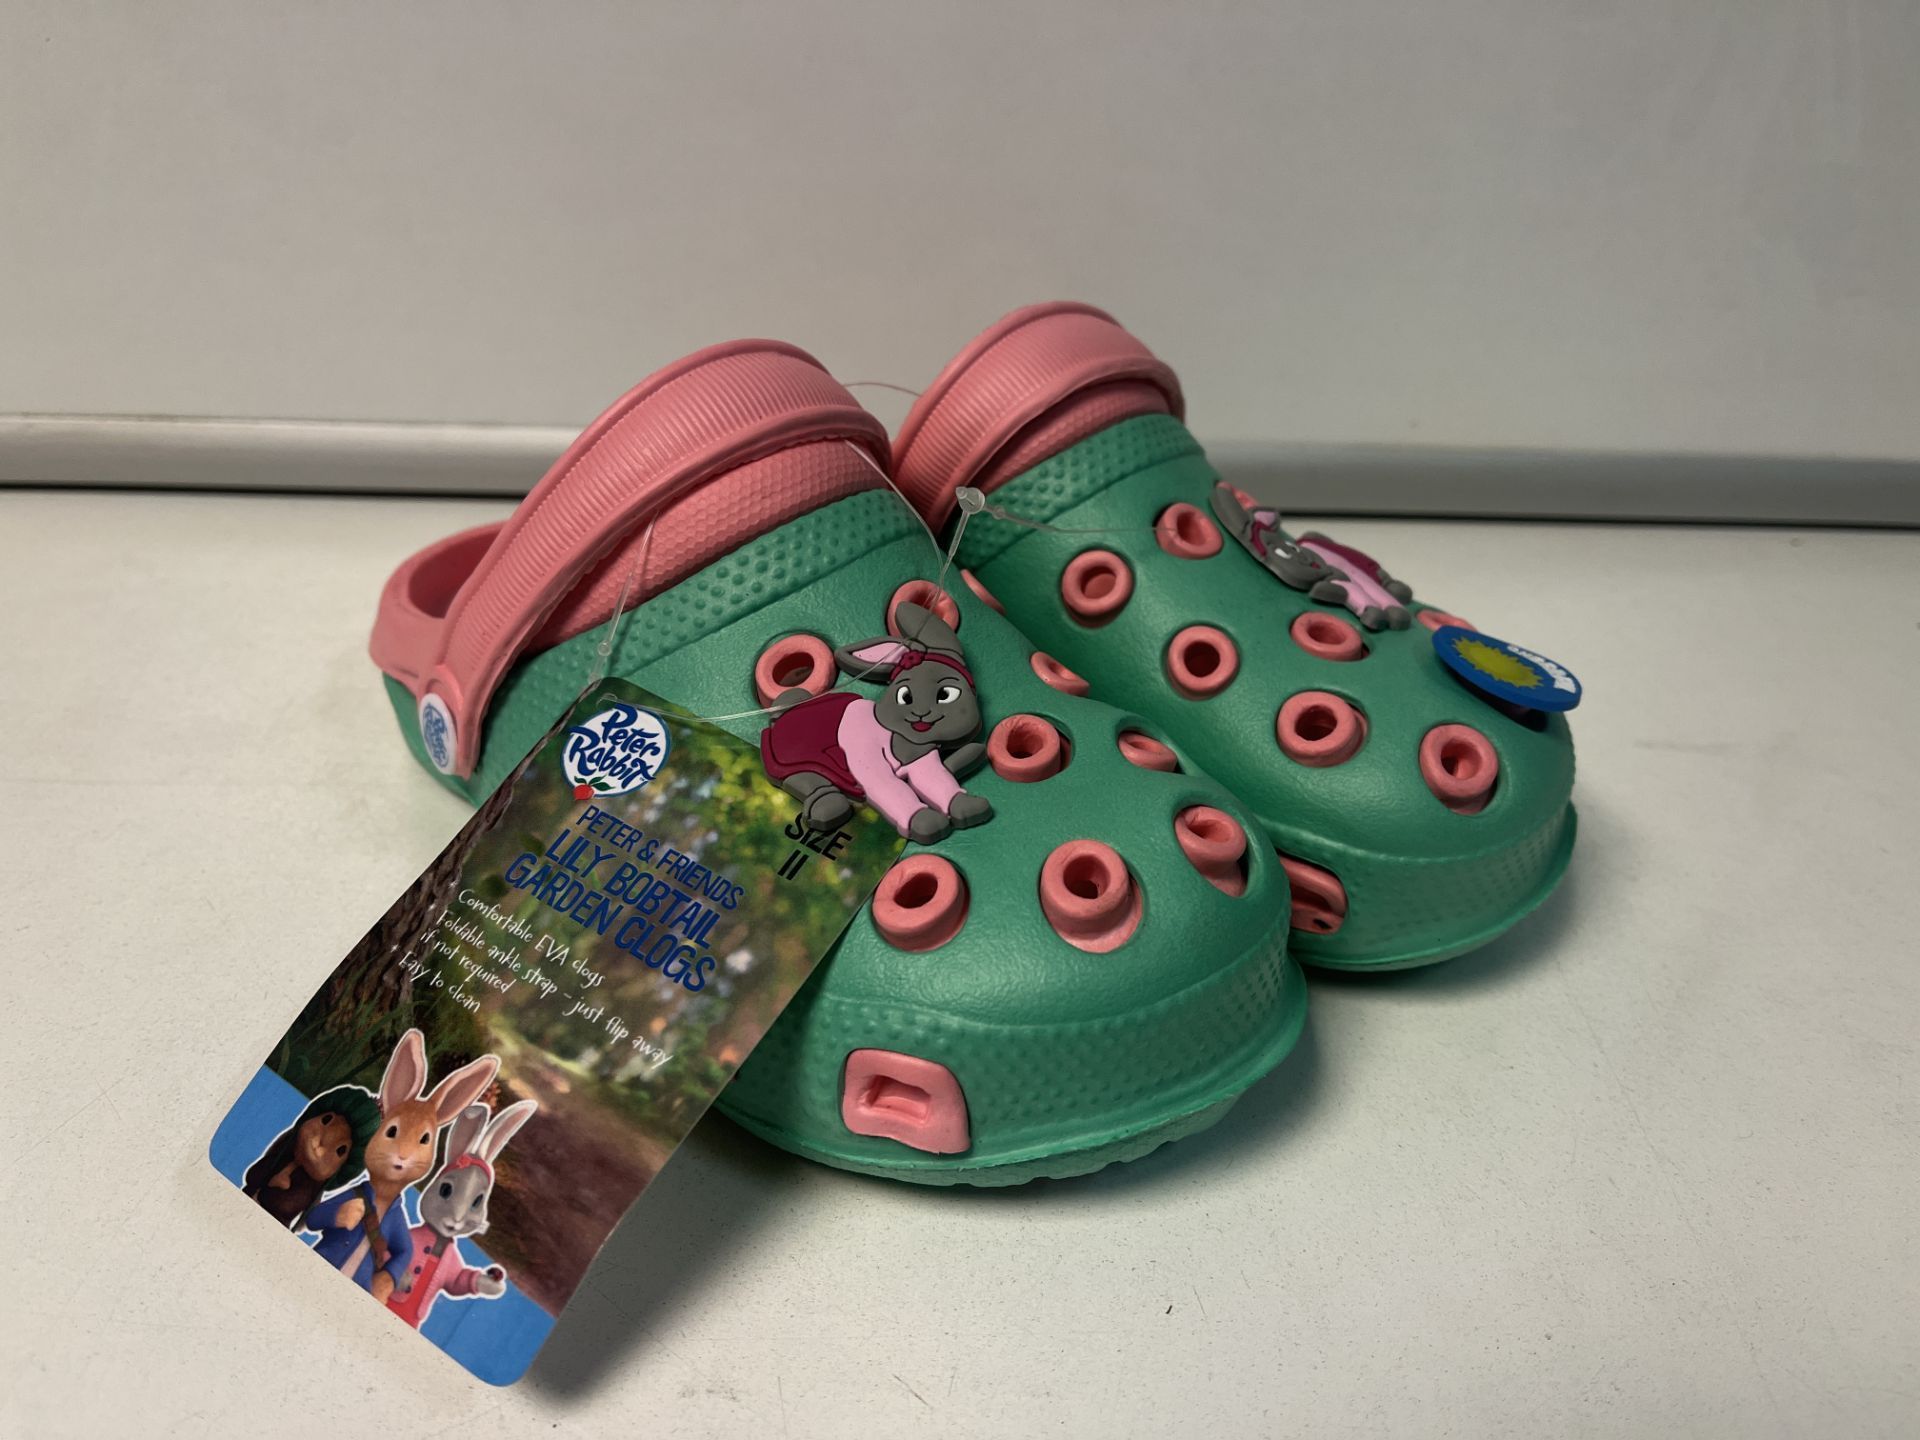 12 X NEW PAIRS OF PETER RABBIT & FRIENDS LILY BOBTAIL GARDEN CLOG CHILDRENS SHOES. SIZES MAY VARY.